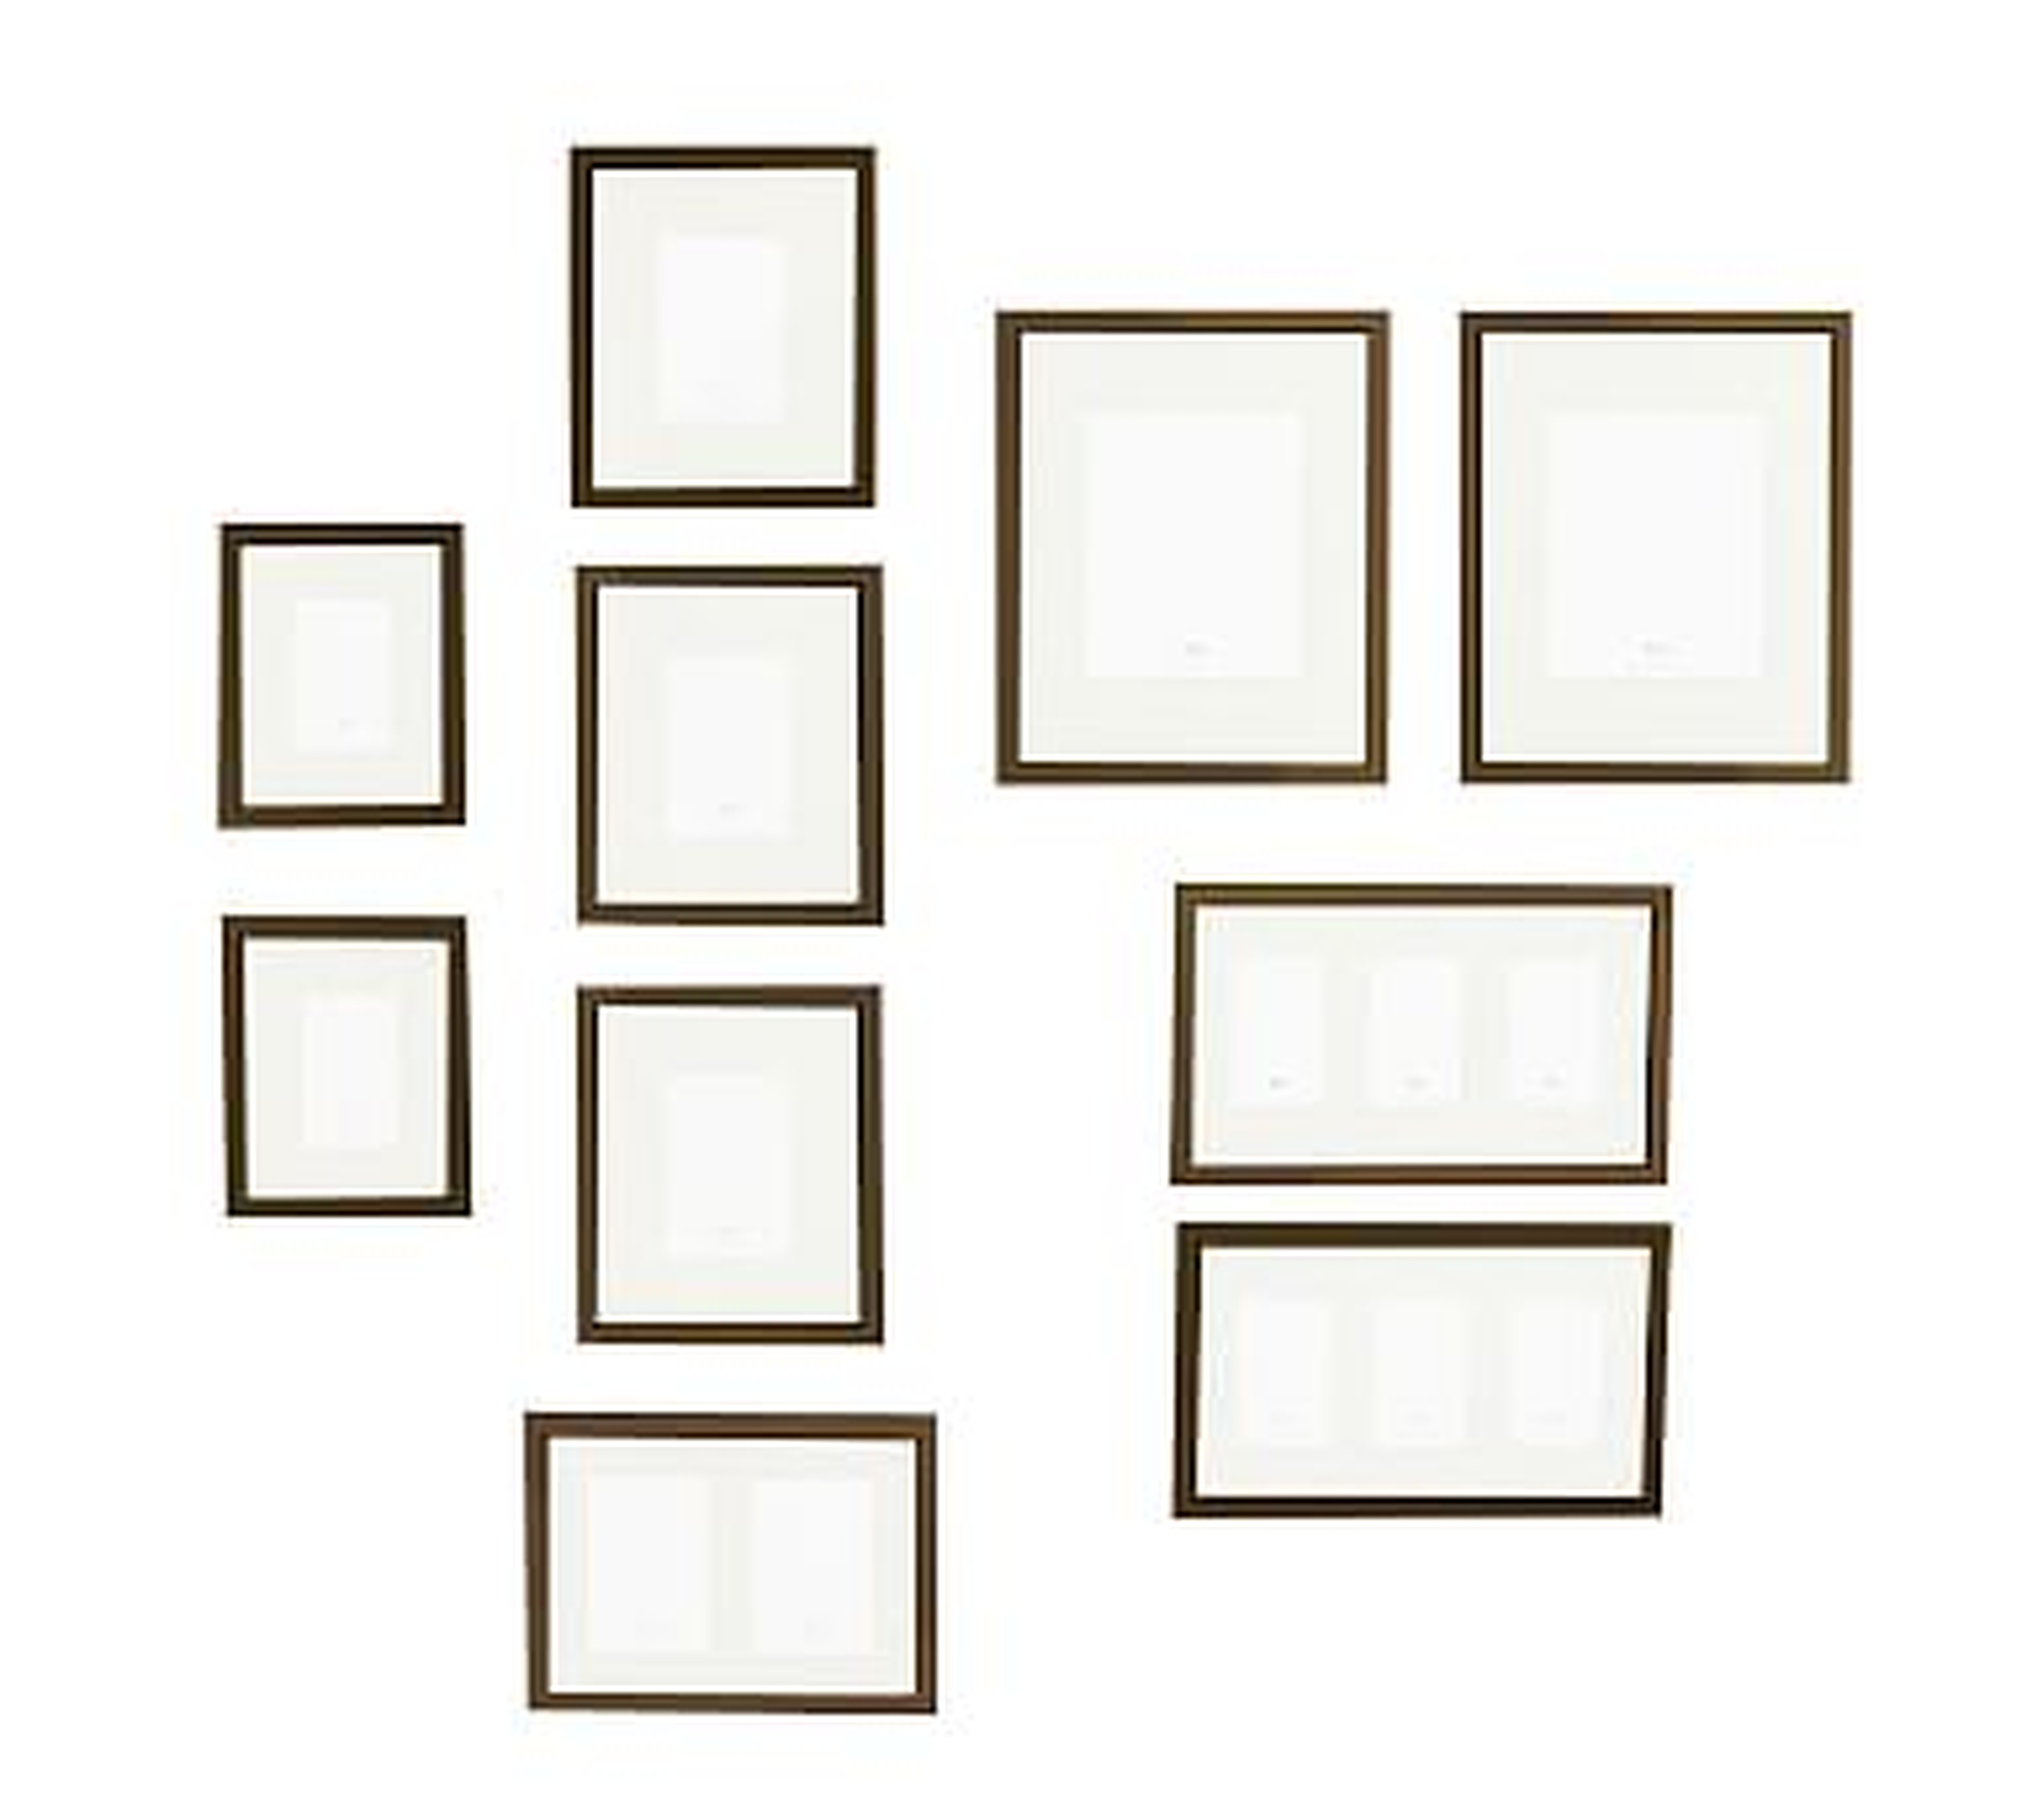 Gallery in a Box, Espresso Stain Frames, Set of 10 - Pottery Barn